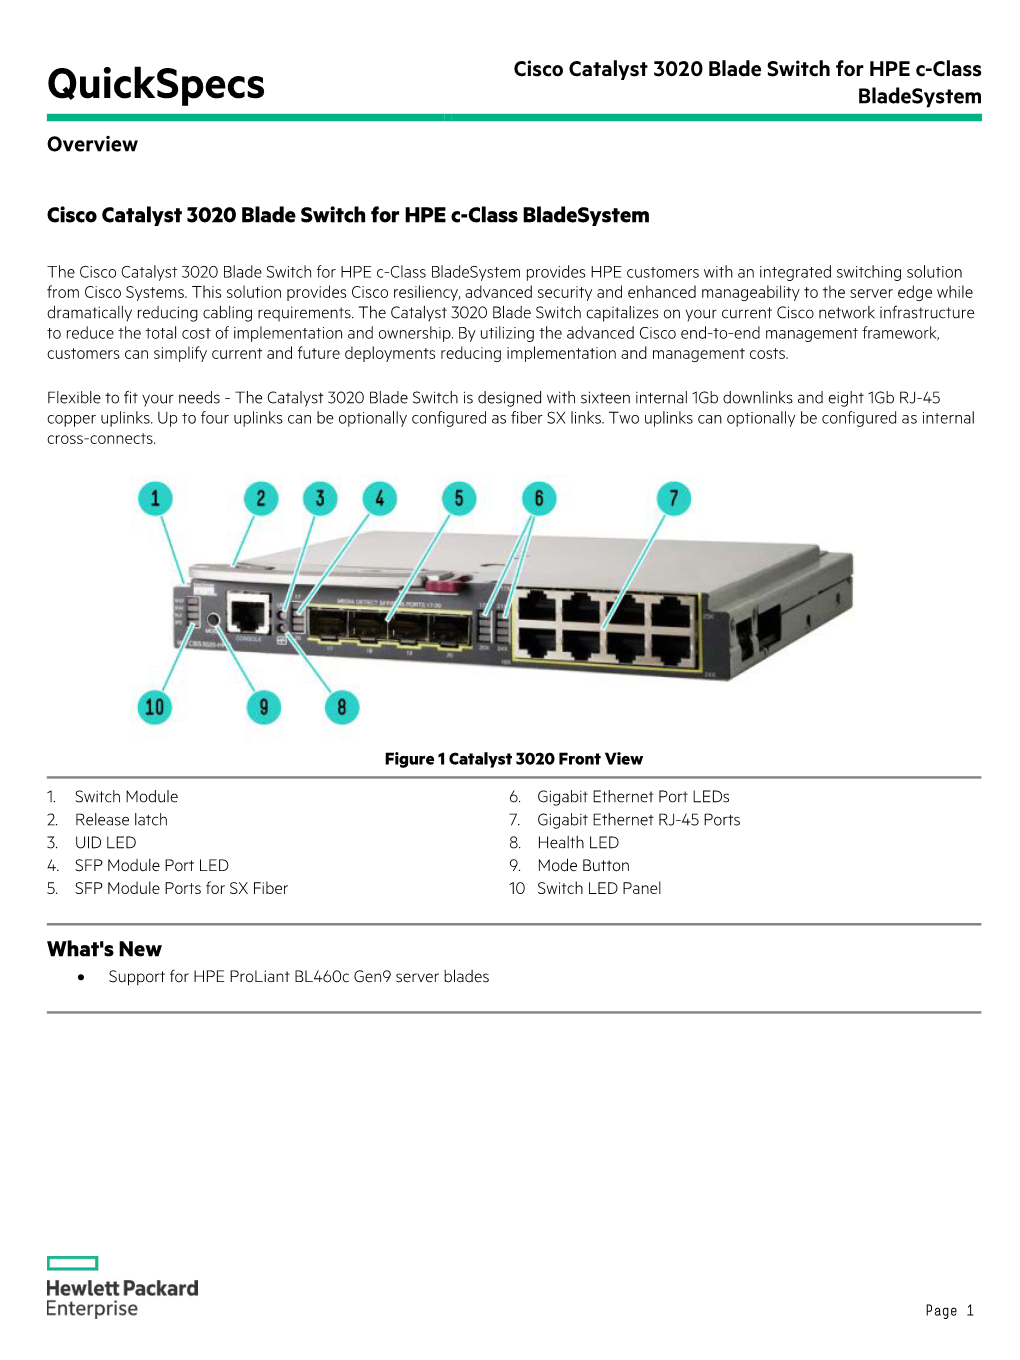 Cisco Catalyst 3020 Blade Switch for HPE C-Class Bladesystem